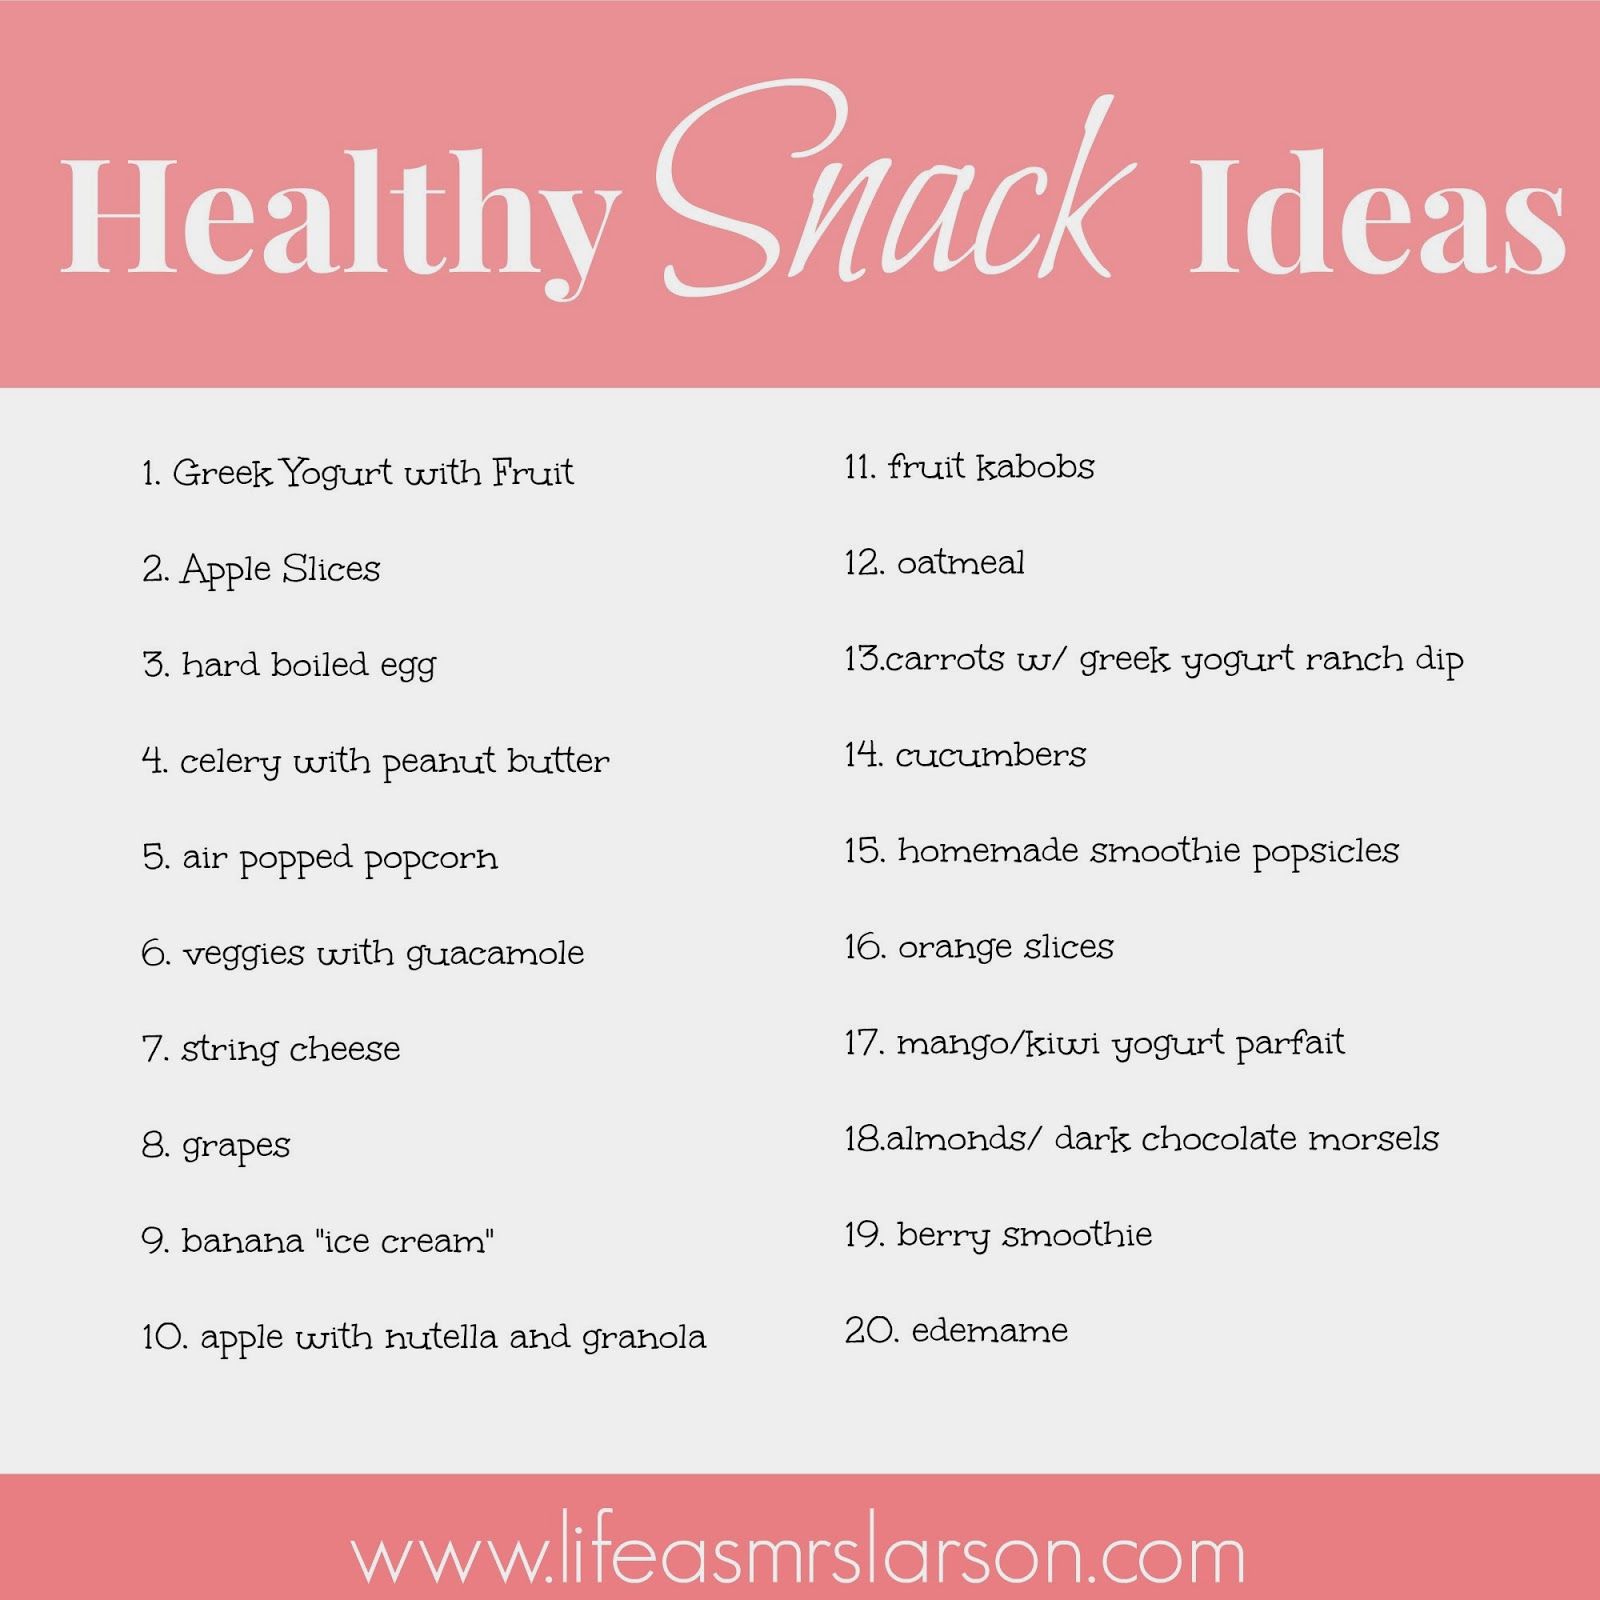 Simple healthy oatmeal recipes, healthy snack ideas to make at home nachos